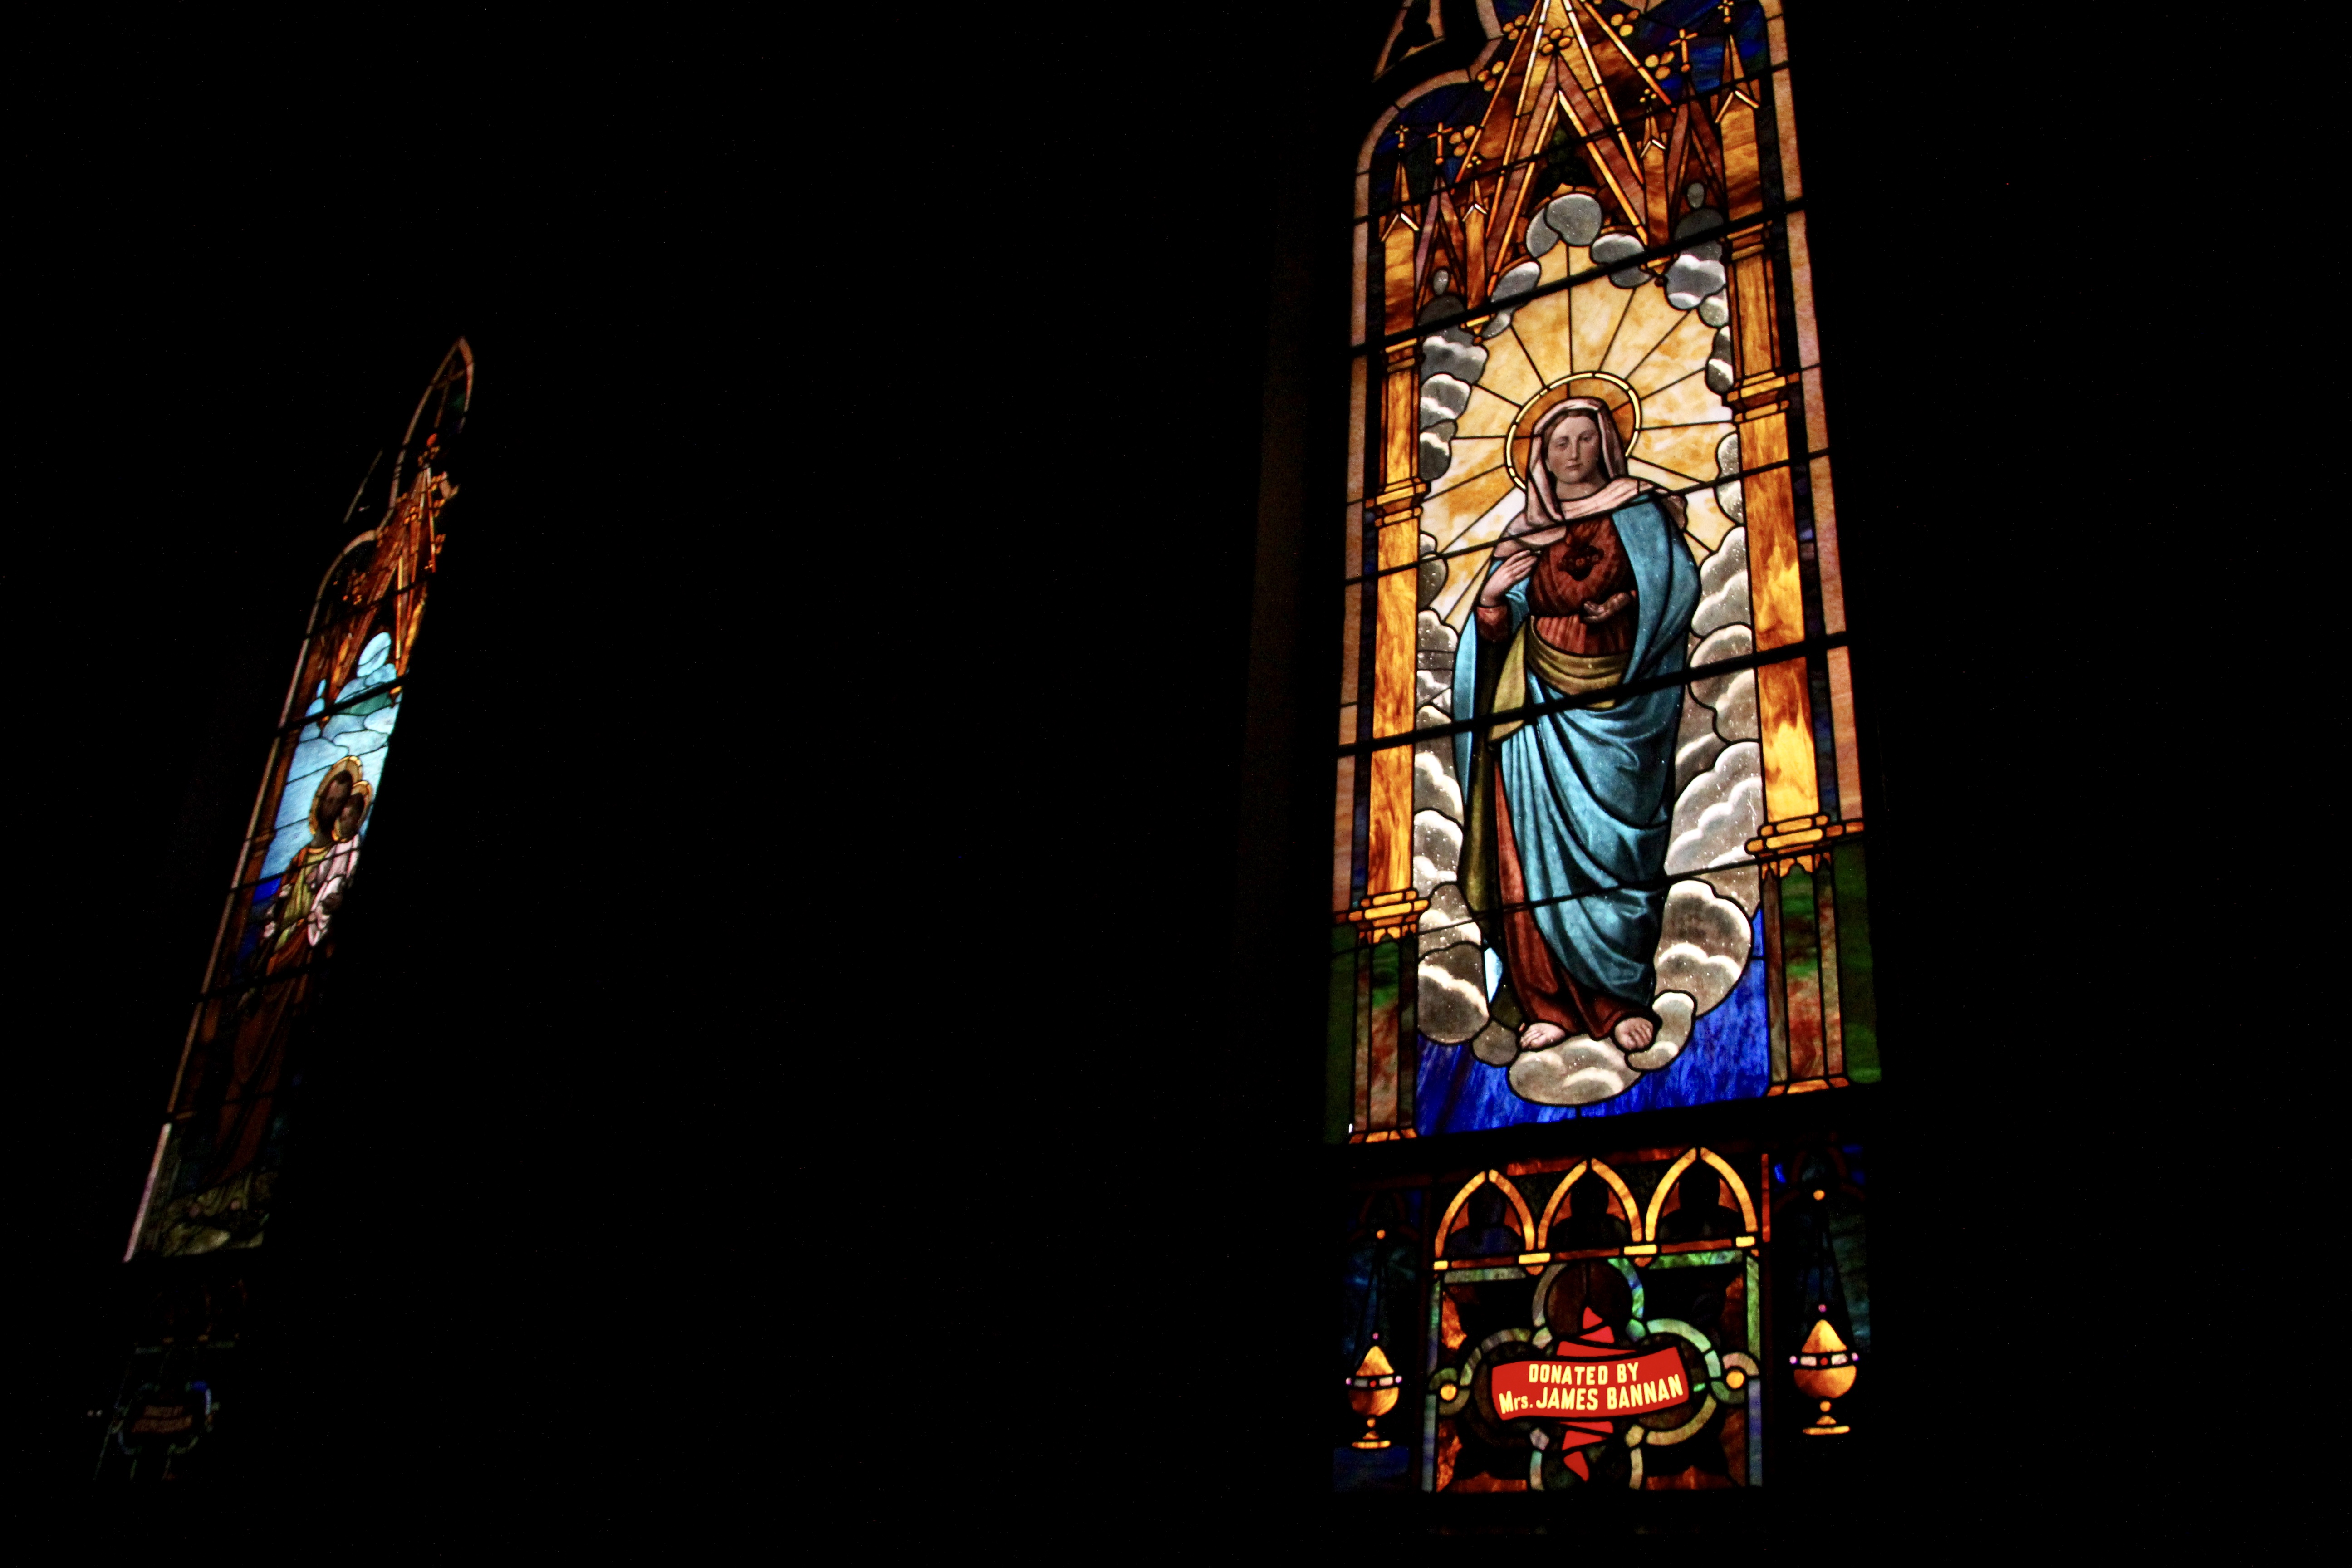 Stained glass window at St. Michael's